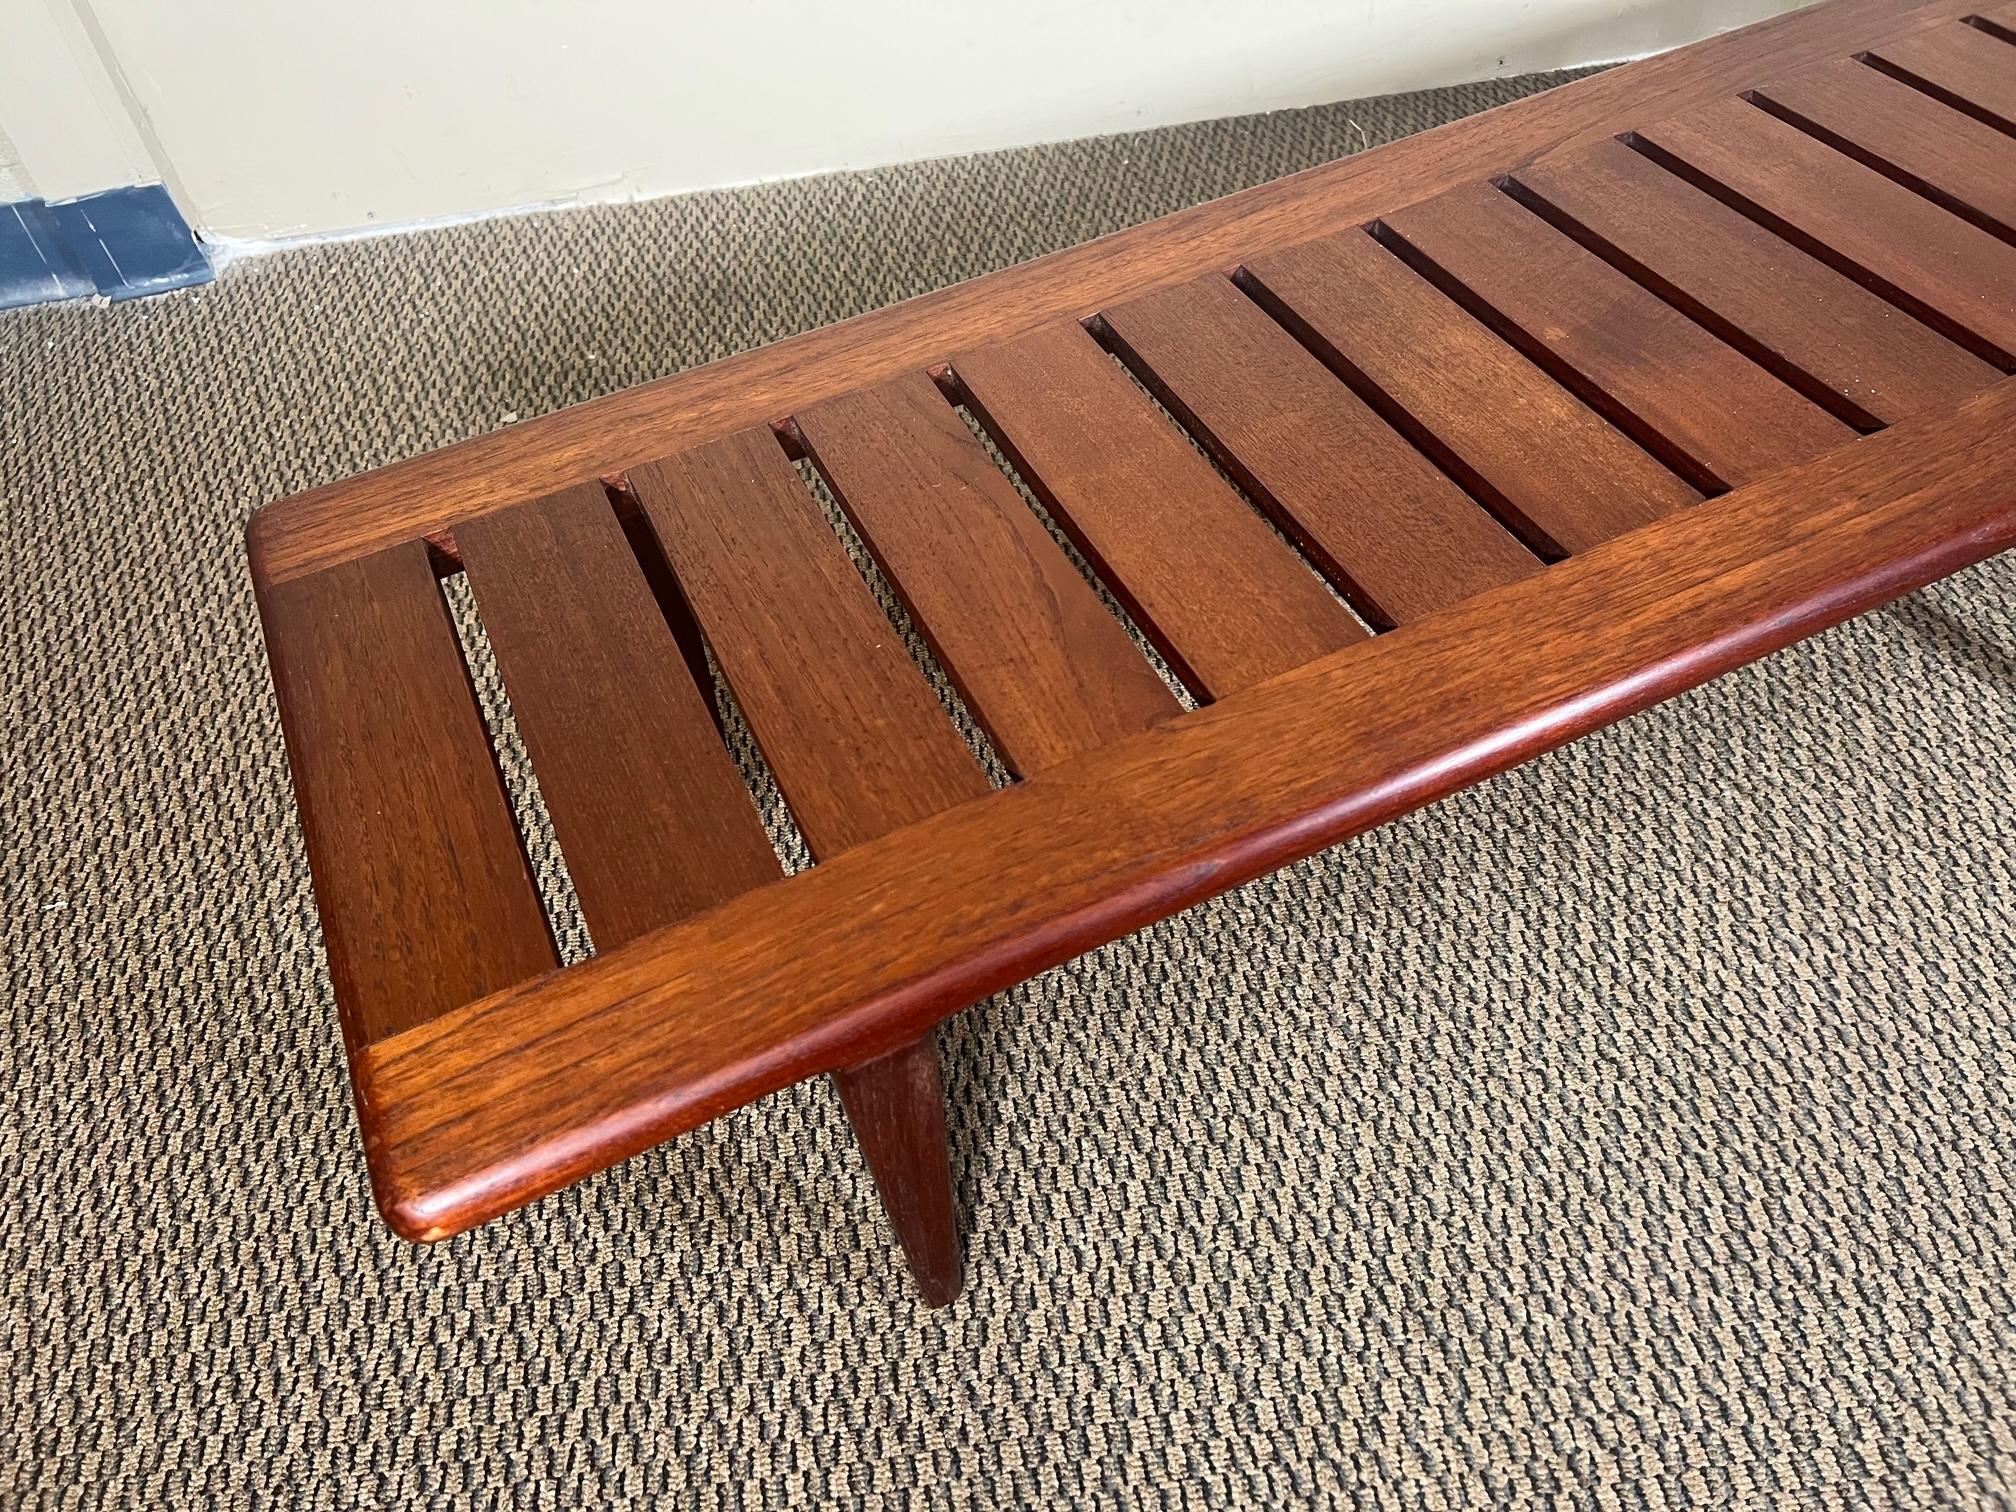 Superb extra long slat bench made of solid teak. Model JH-574 designed by Hans J. Wegner for cabinetmaker Johannes Hansen of Denmark. Dating back to the sixties. The bench is supported by six strong tapered legs. A beautiful example of minimalist